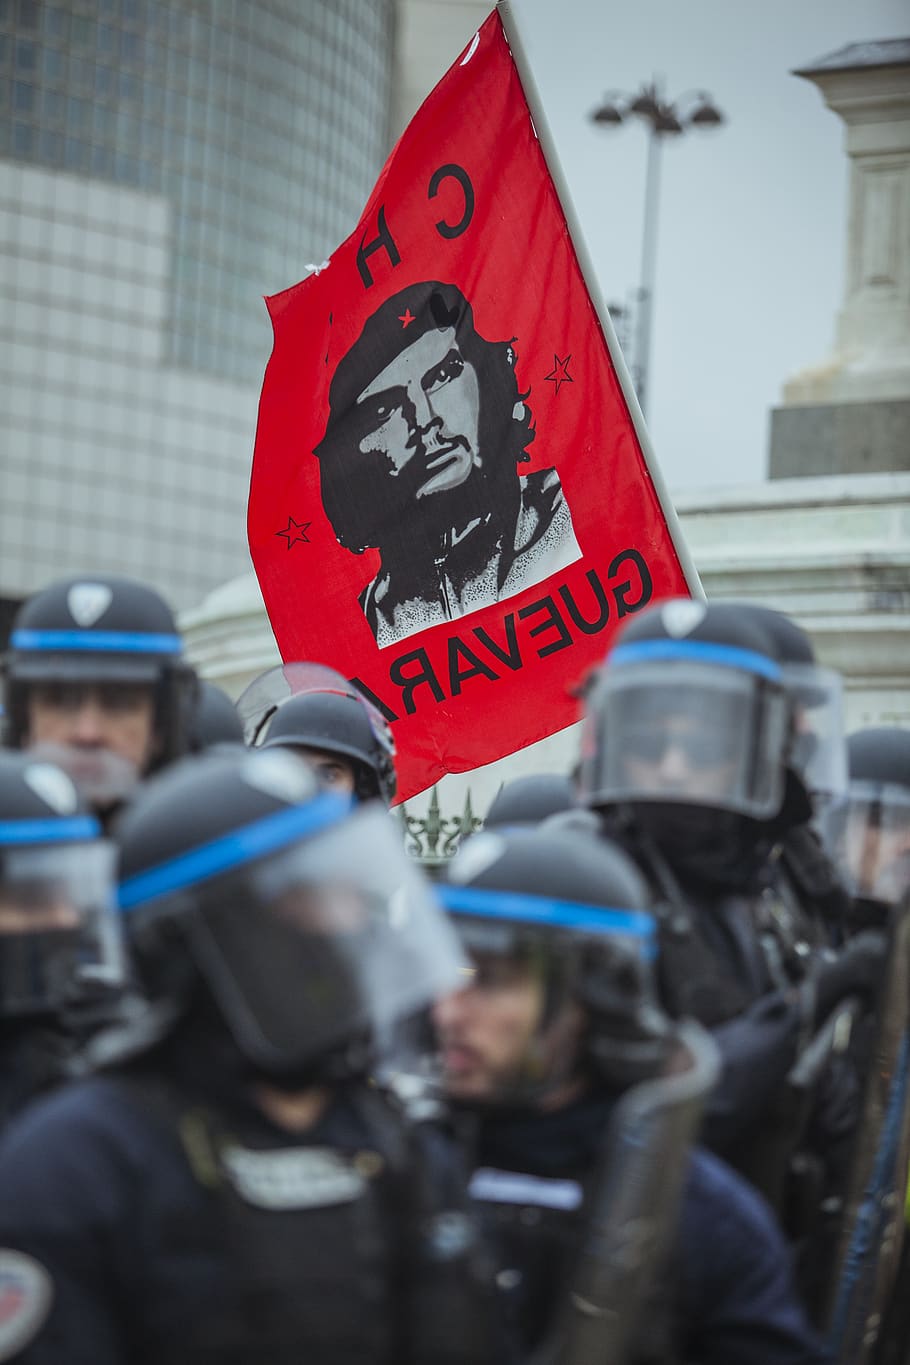 HD wallpaper: red Che Guevara flag near group of police during ...